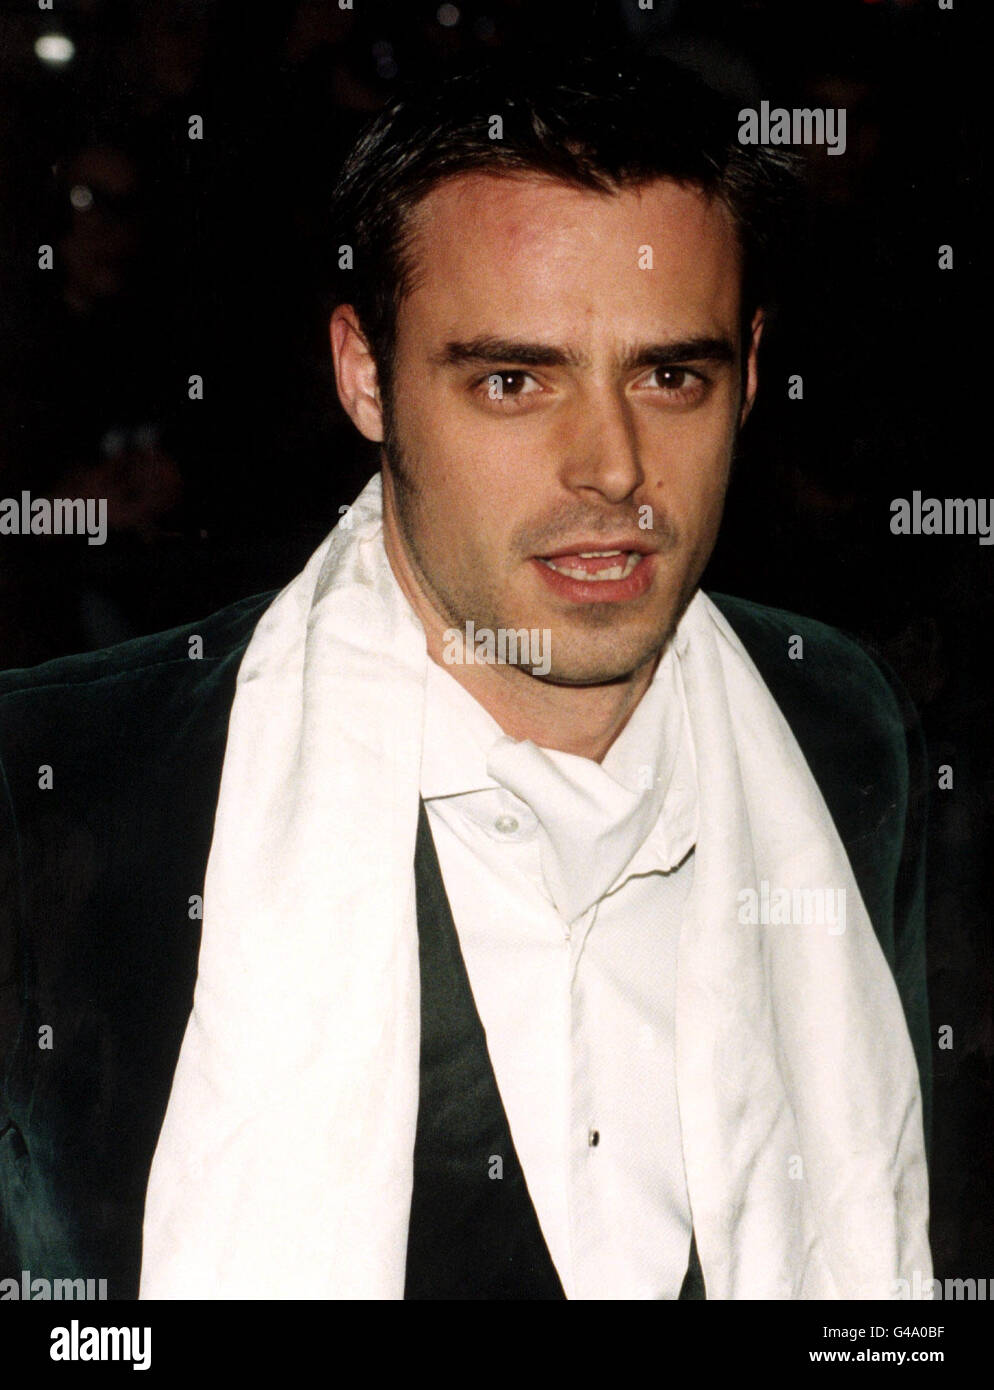 PA NEWS PHOTO 15/1/98 JAMIE THEAKSTON AT THE PARK LANE HOTEL, LONDON AHEAD OF THE GALA REVUE IN CELEBRATION OF THE FORTHCOMING ALBUM  'TWENTIETH CENTURY BLUES - THE SONGS OF NOEL COWARD' WHICH WILL BE RELEASED THROUGH EMI RECORDS. Stock Photo